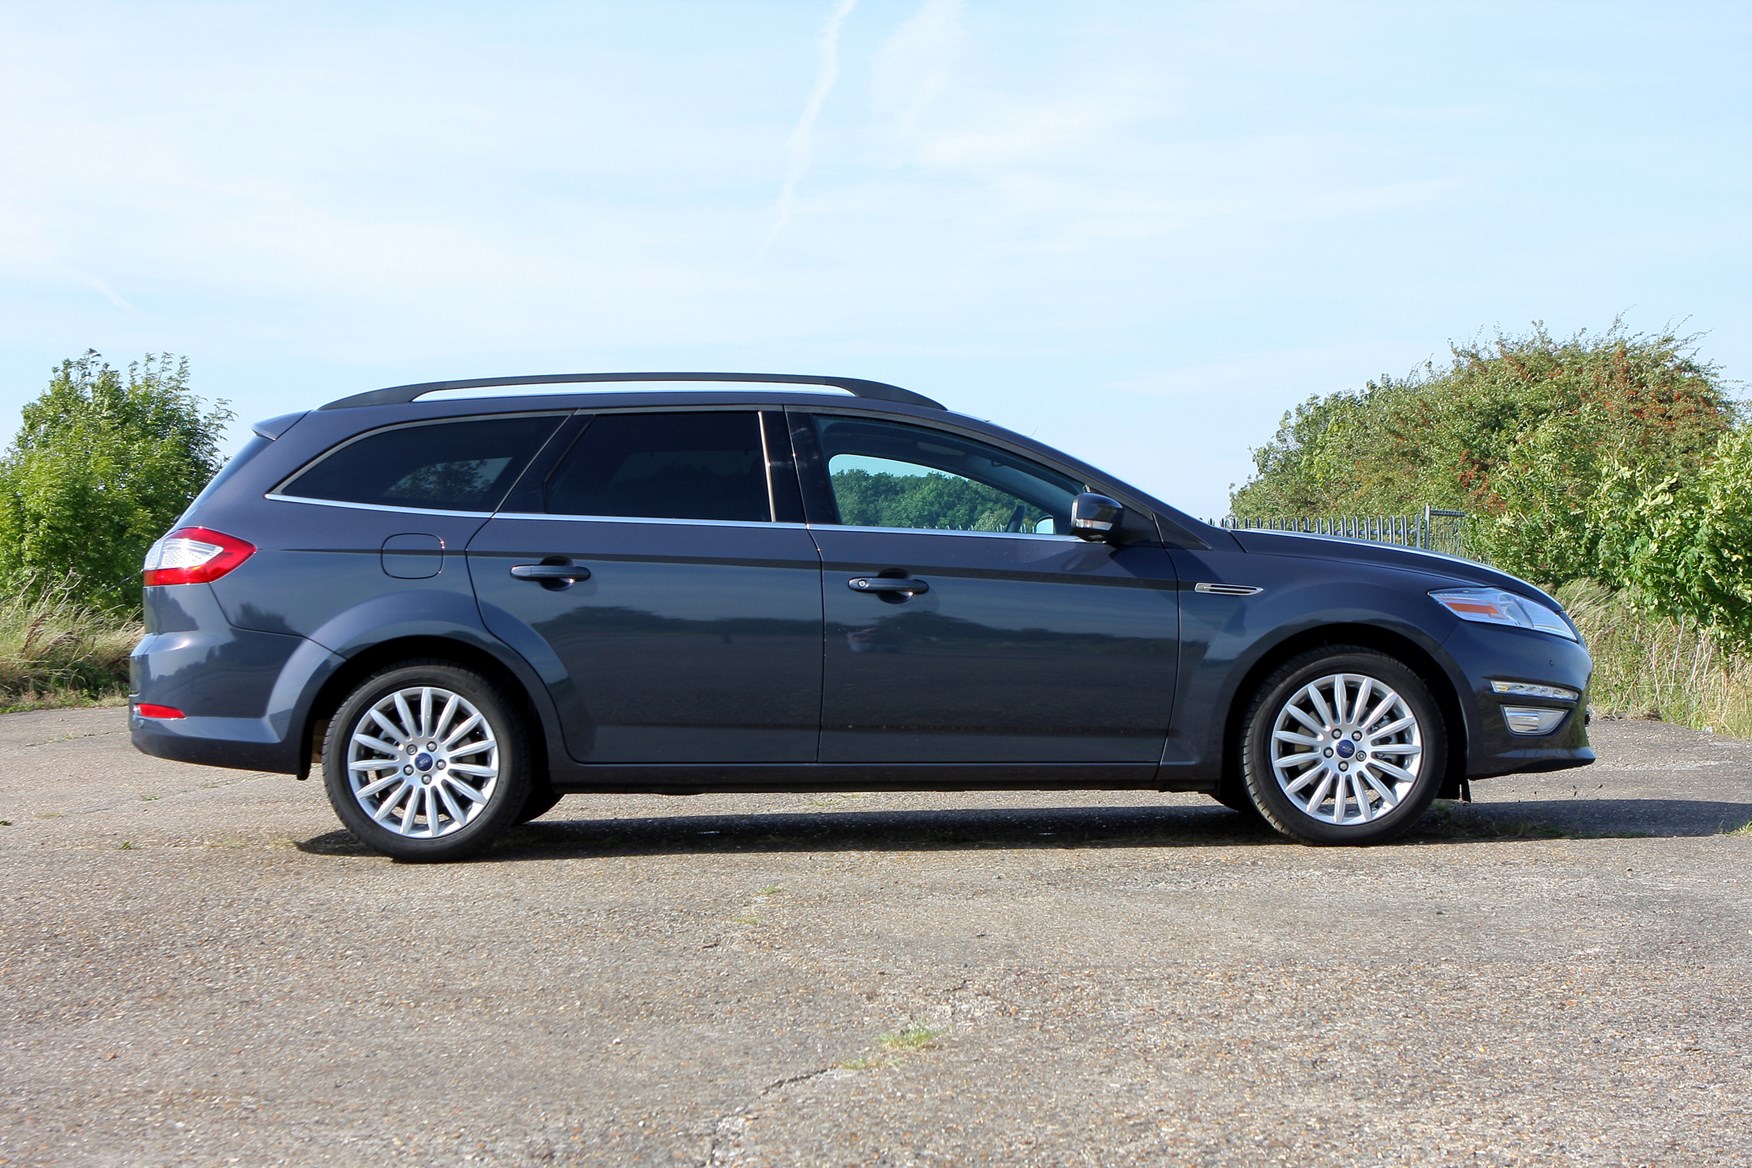 Used Ford Mondeo Estate (2007 - 2014) Review | Parkers